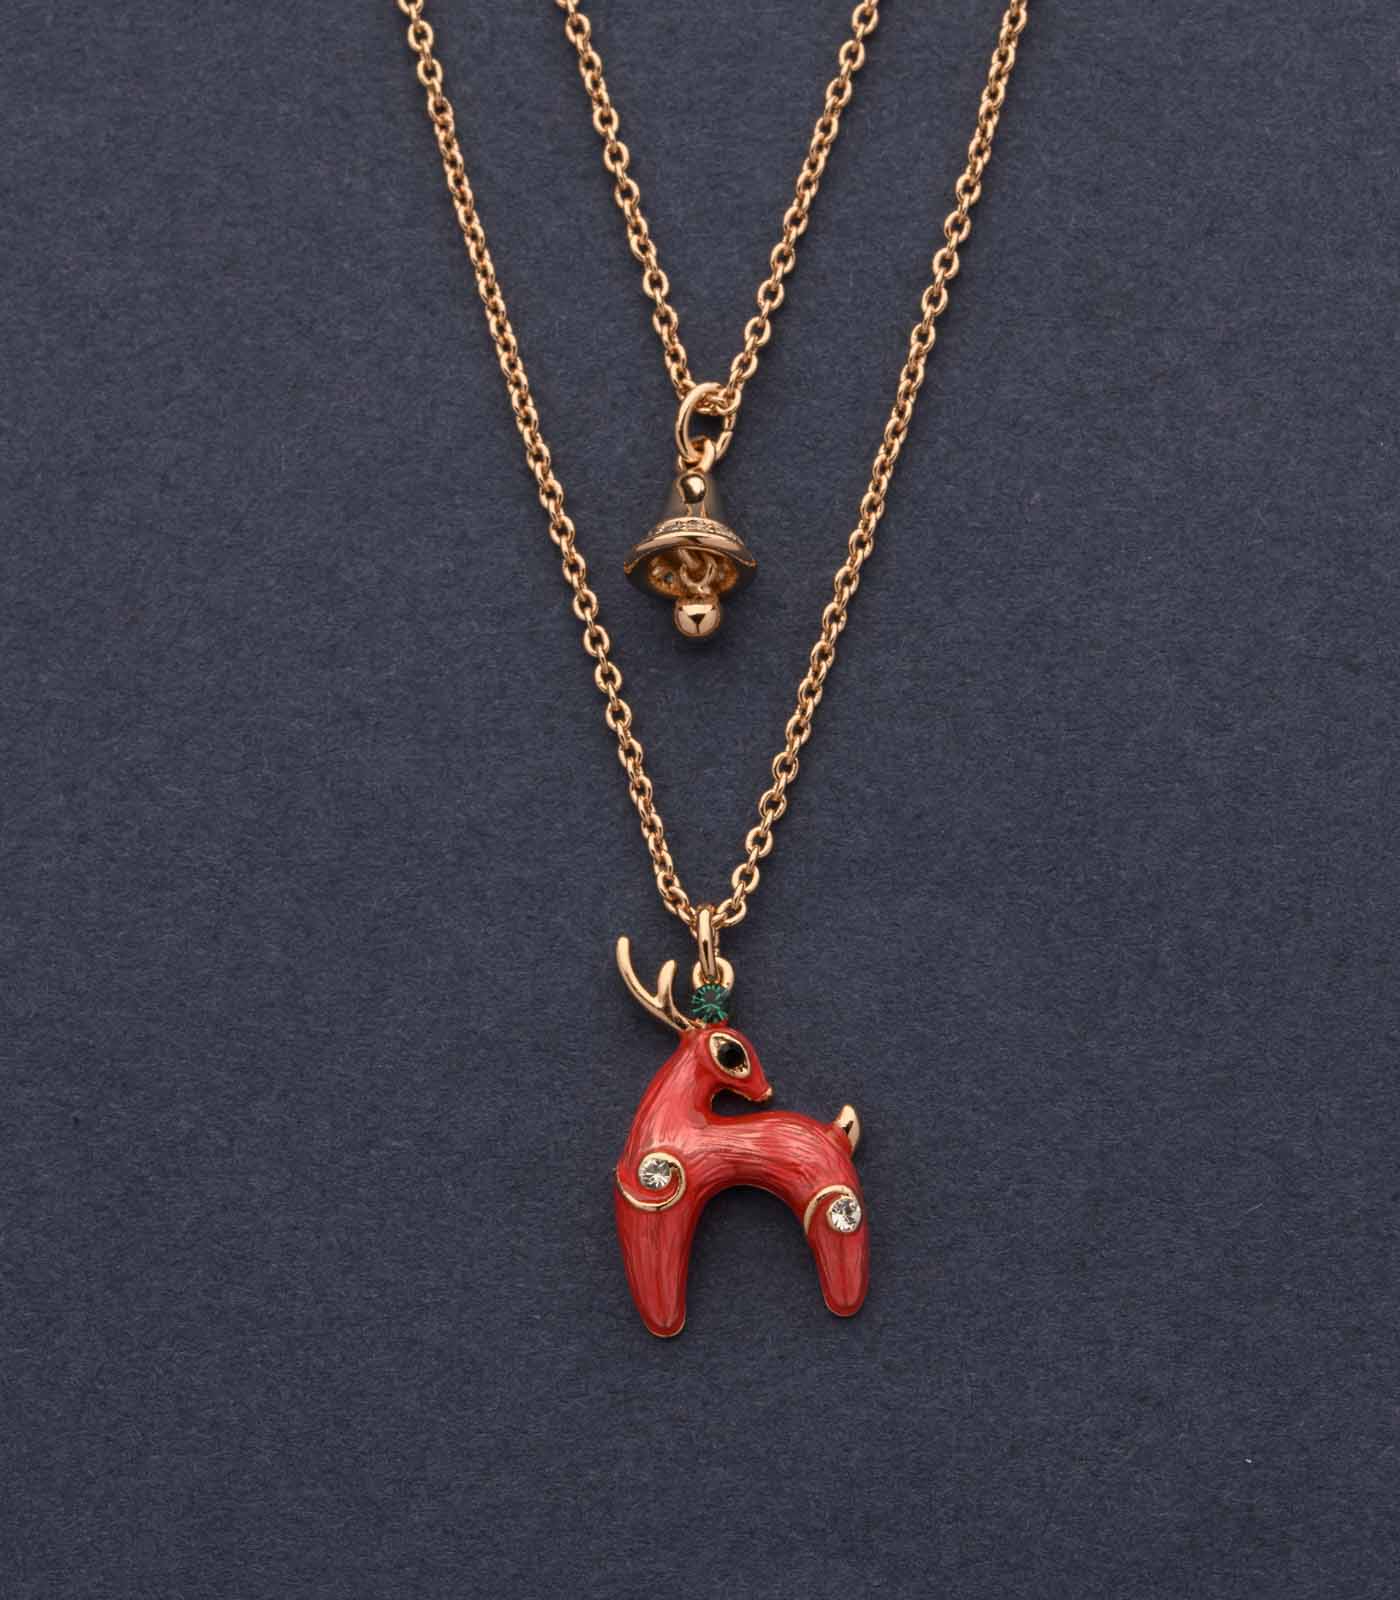 Adorable Reindeer Of Christmas Eve Necklace (Brass)